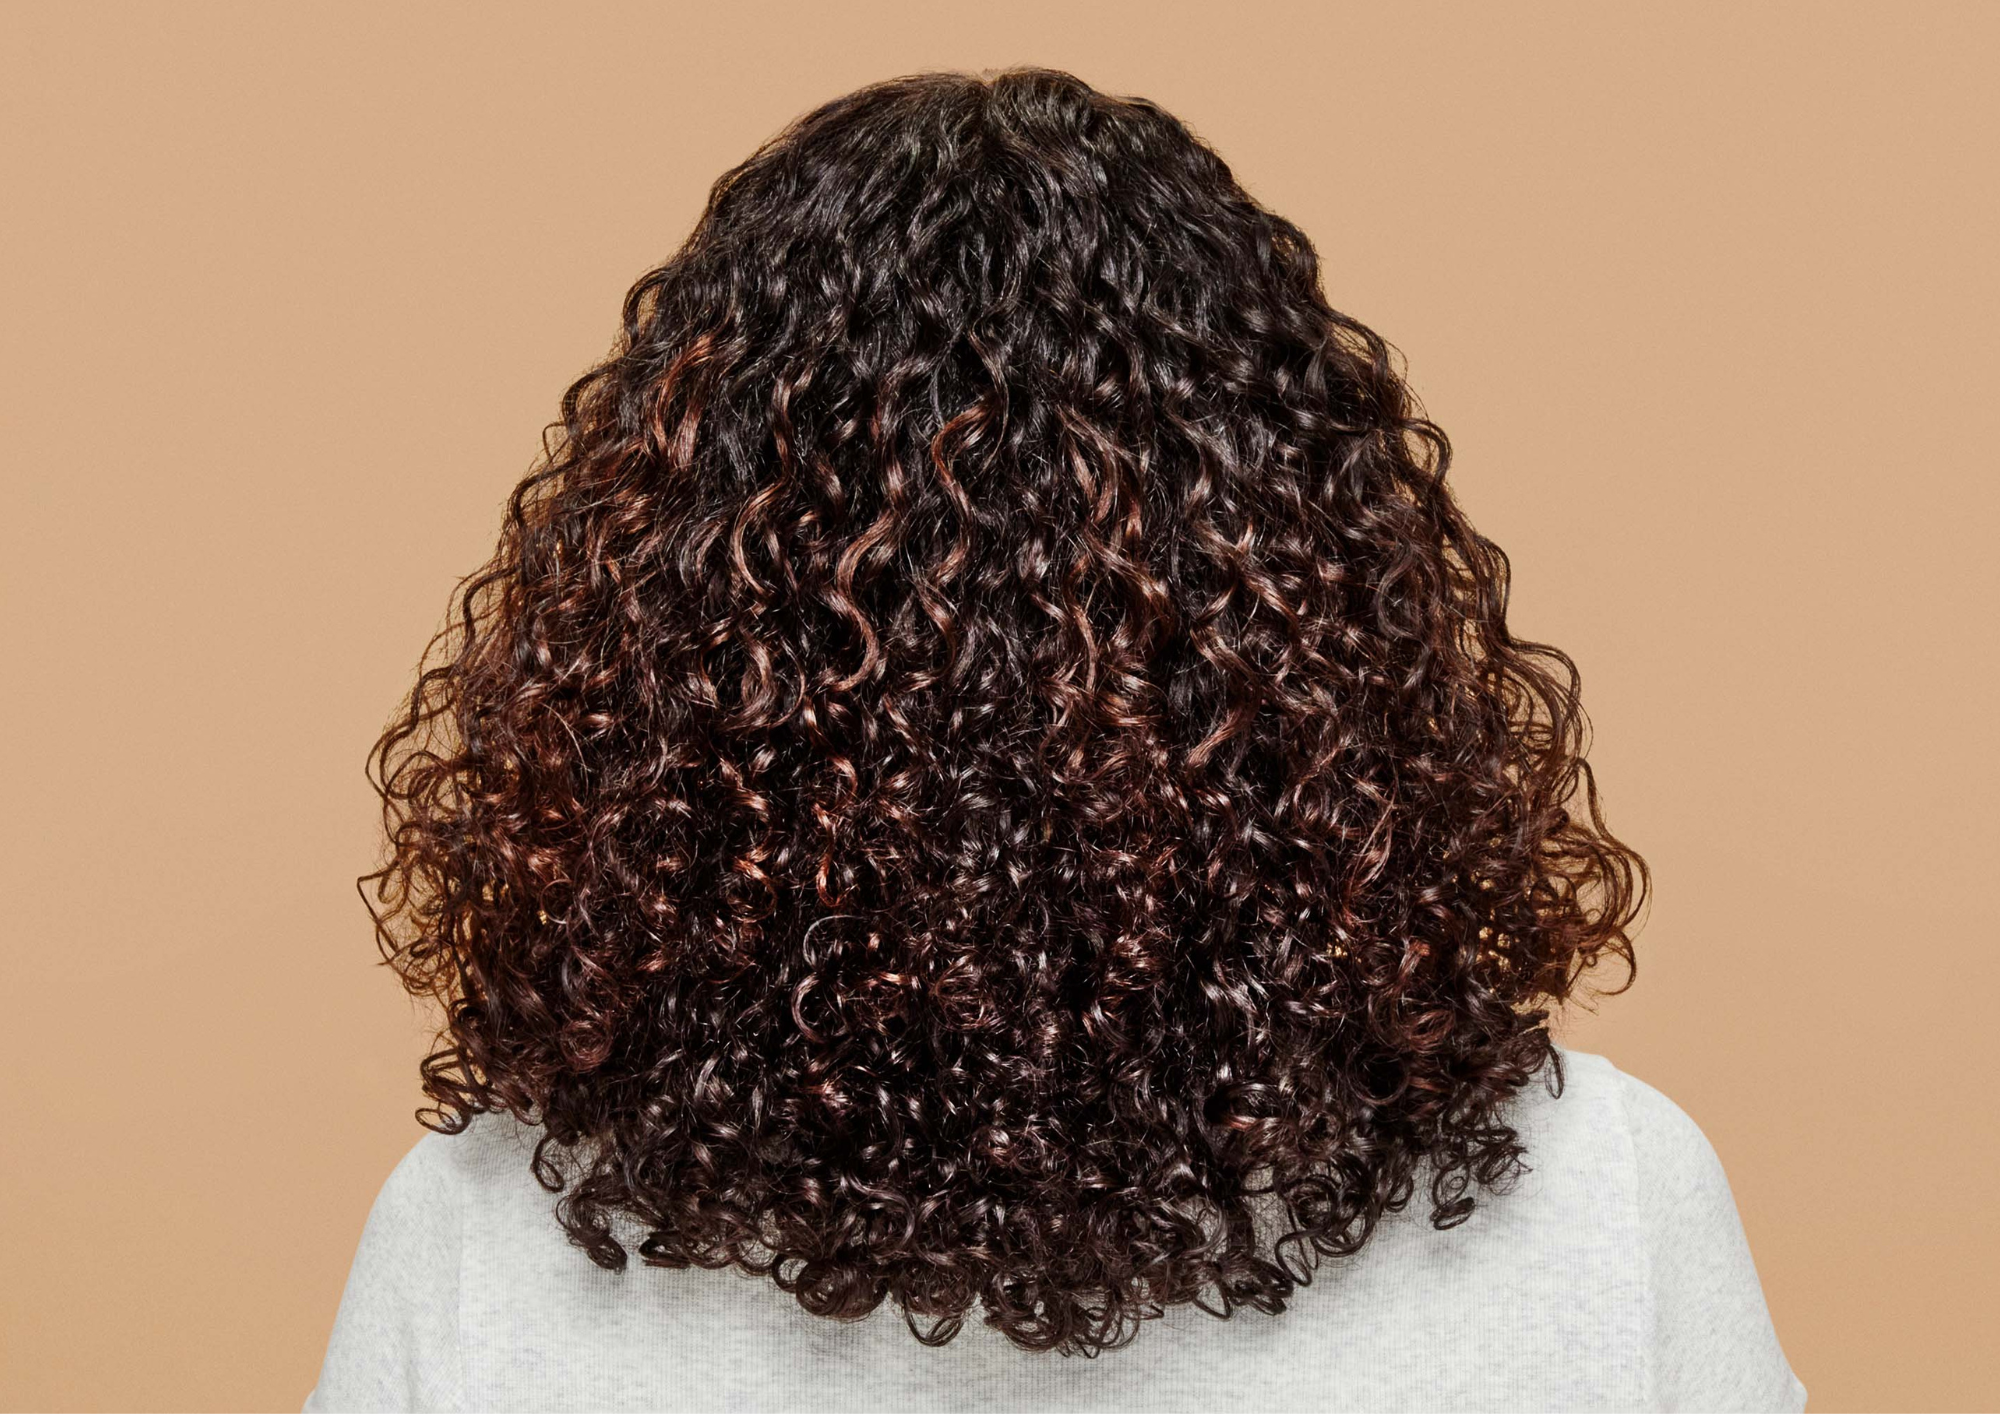 How To Make 4C Hair Soft And Curly